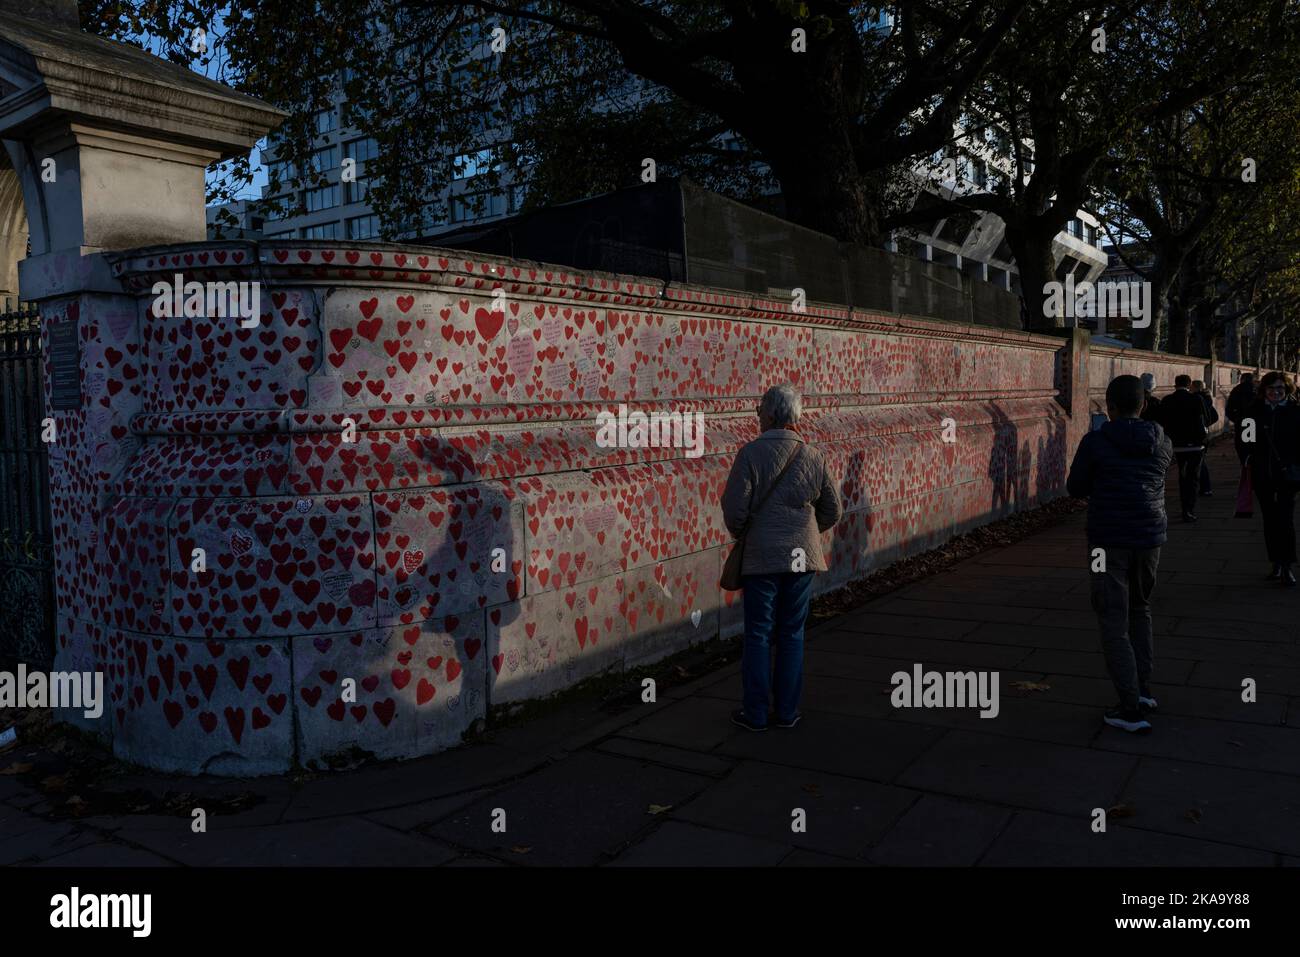 The National Covid Memorial Wall at dusk, kilometre-long wall on the Southbank, decorated with love hearts, names, dates, and messages, London, UK Stock Photo